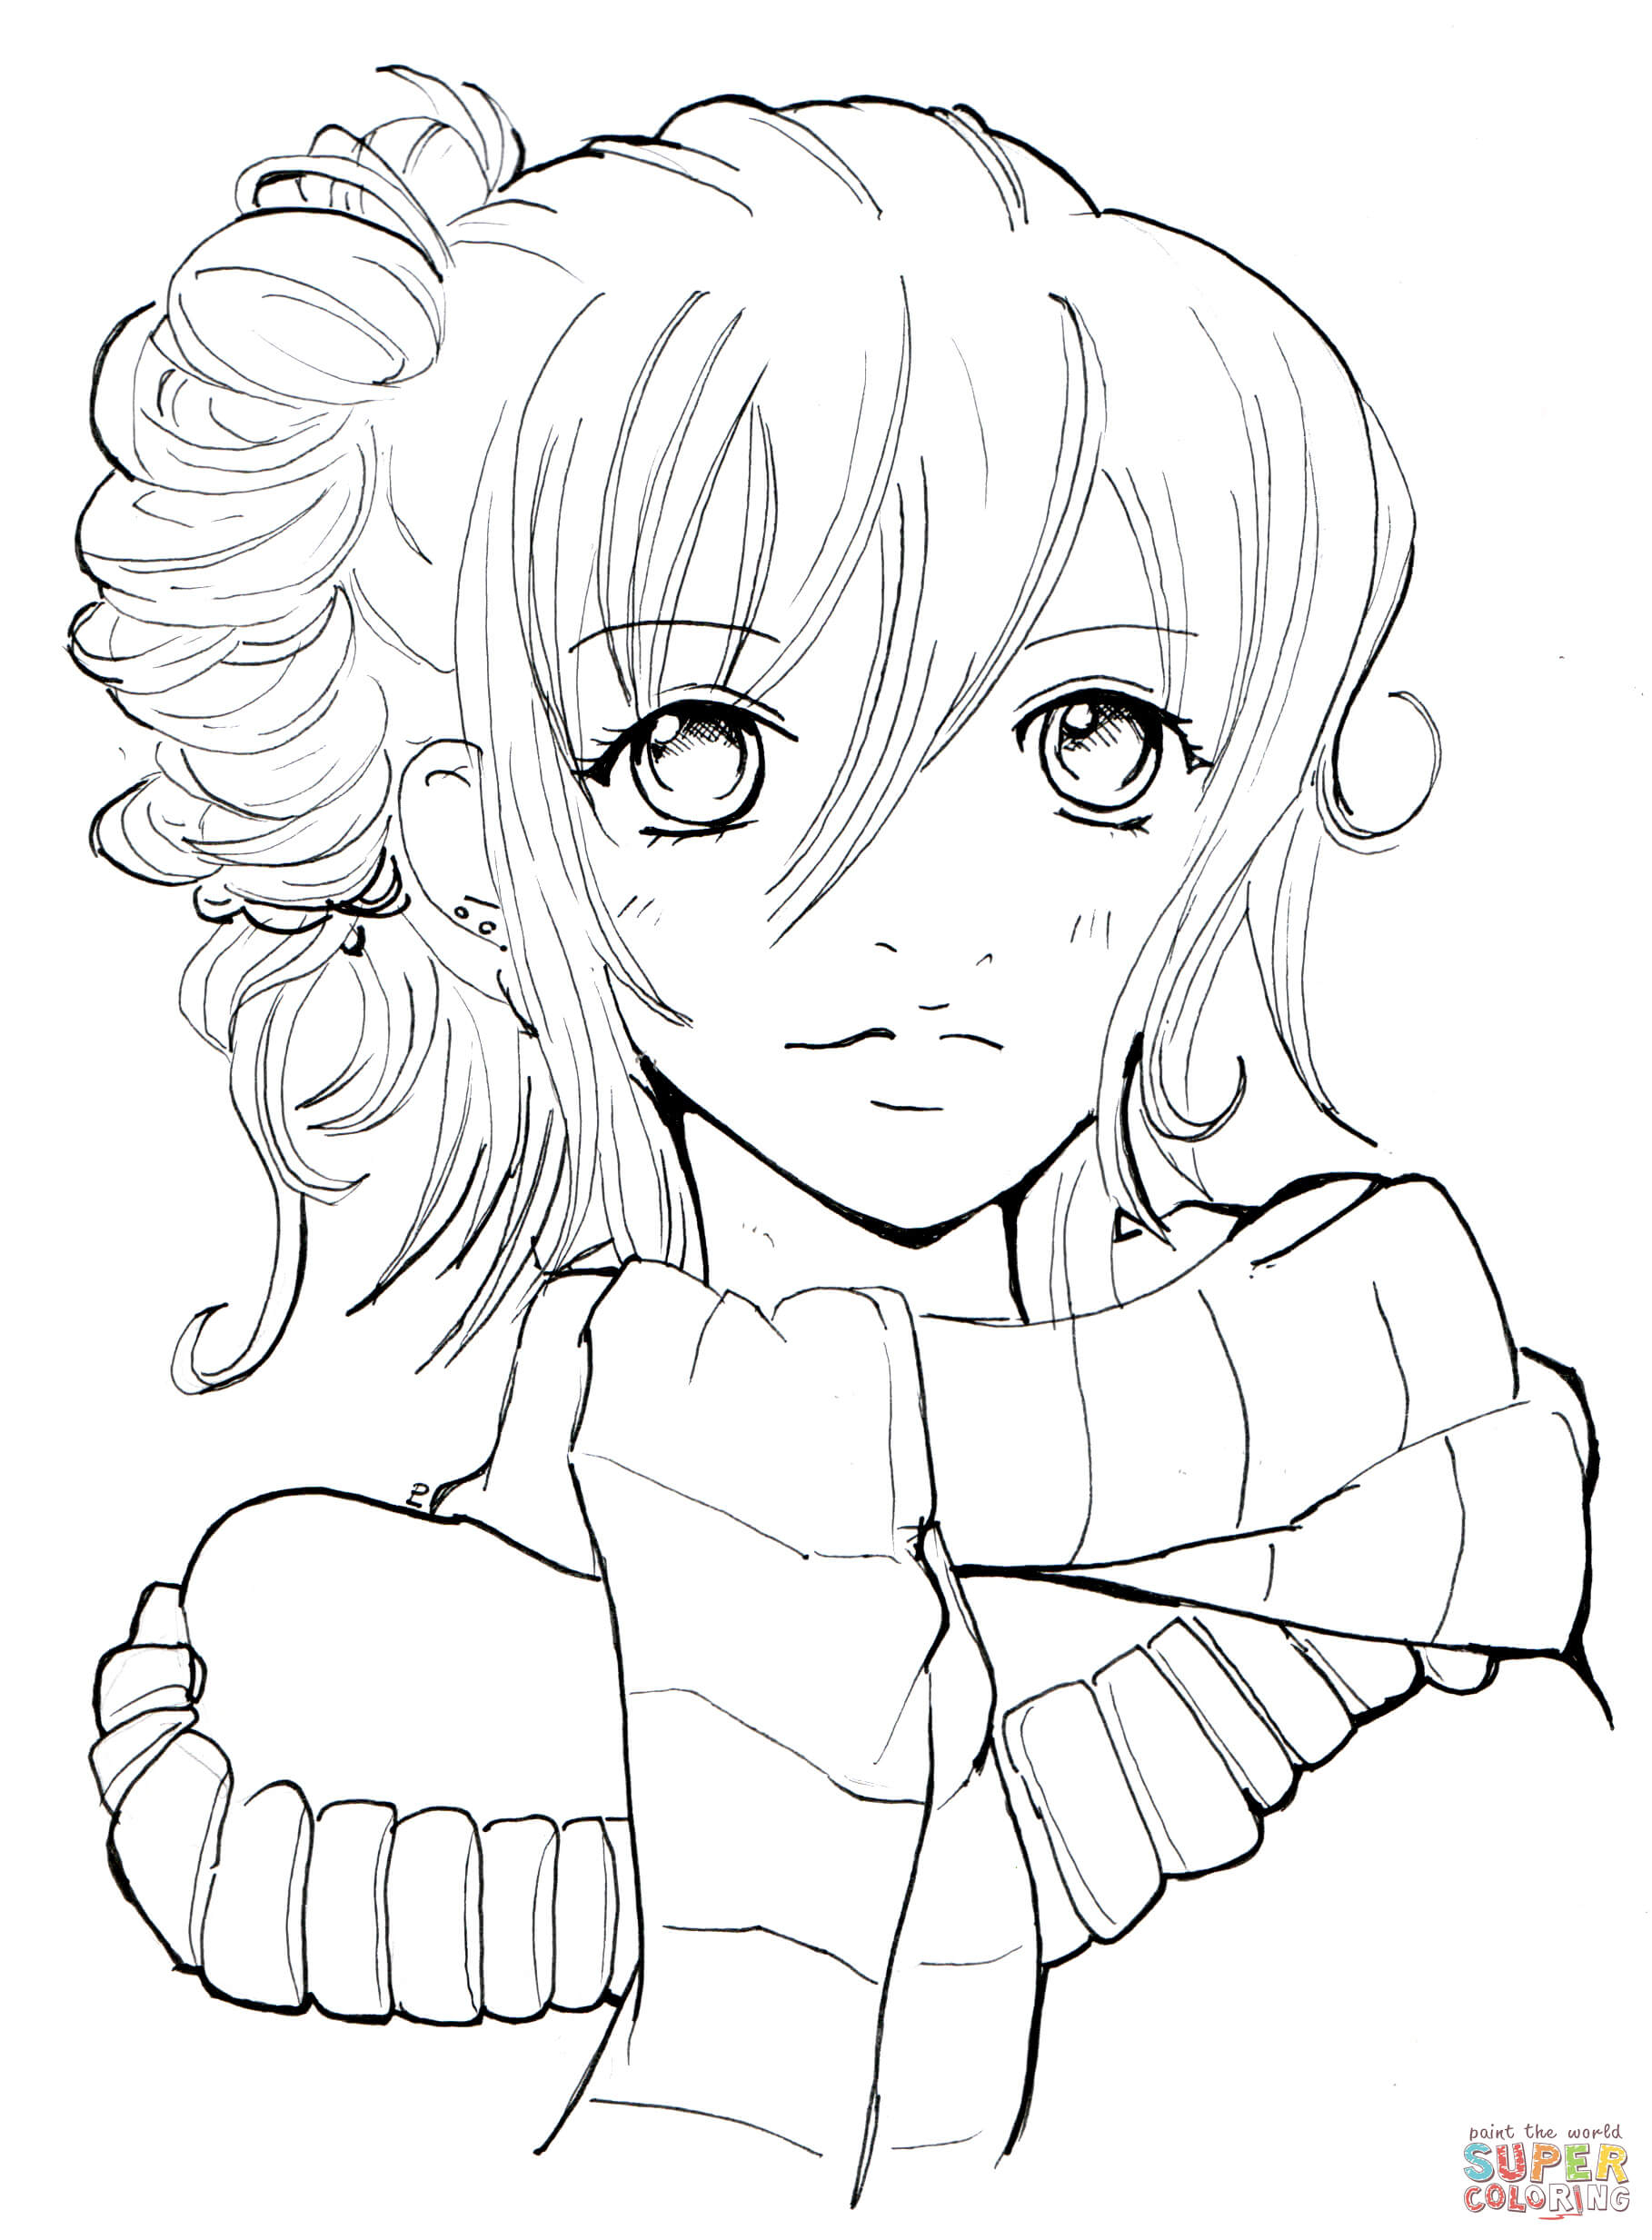 Girl With Scarf Coloring Page | Free Printable Coloring Pages dedans Ice Angel Coloriage,